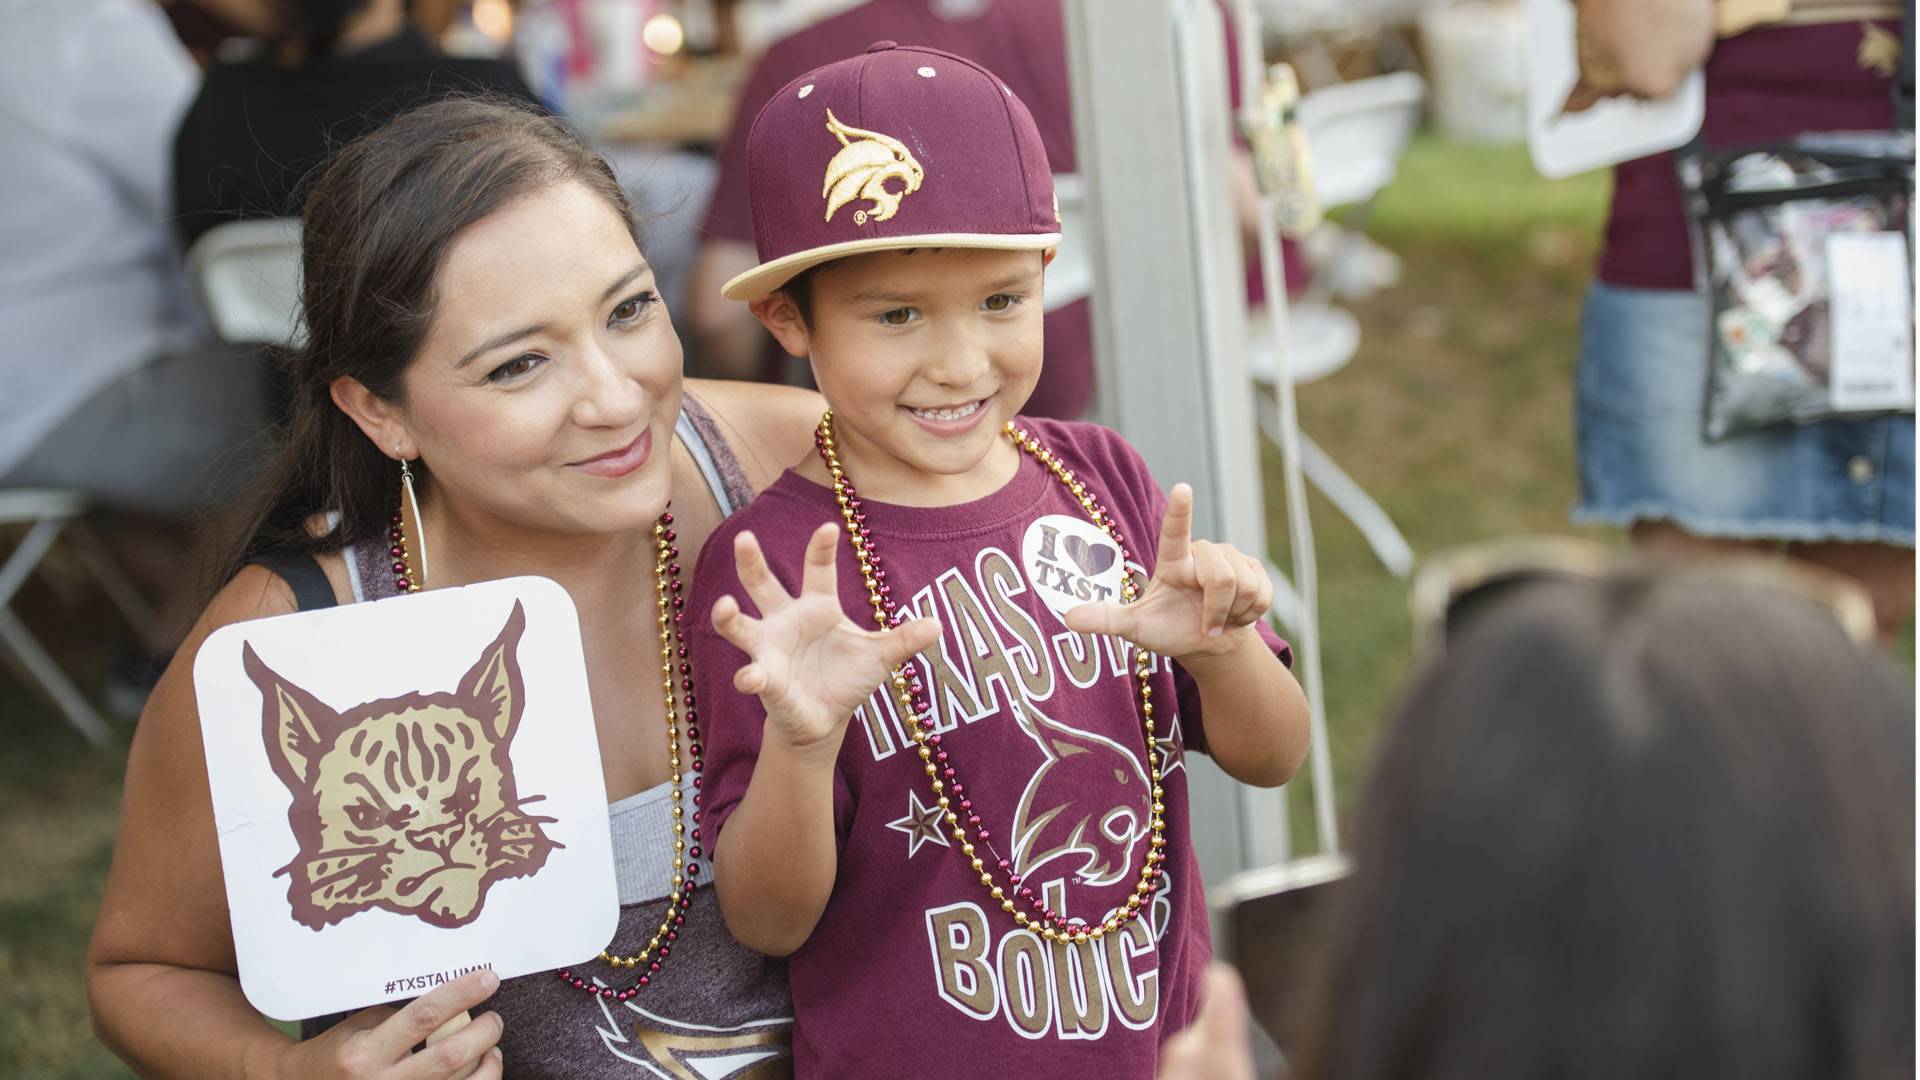 Woman holding Texas state alumni sign next to her child wearing bobcat merch.